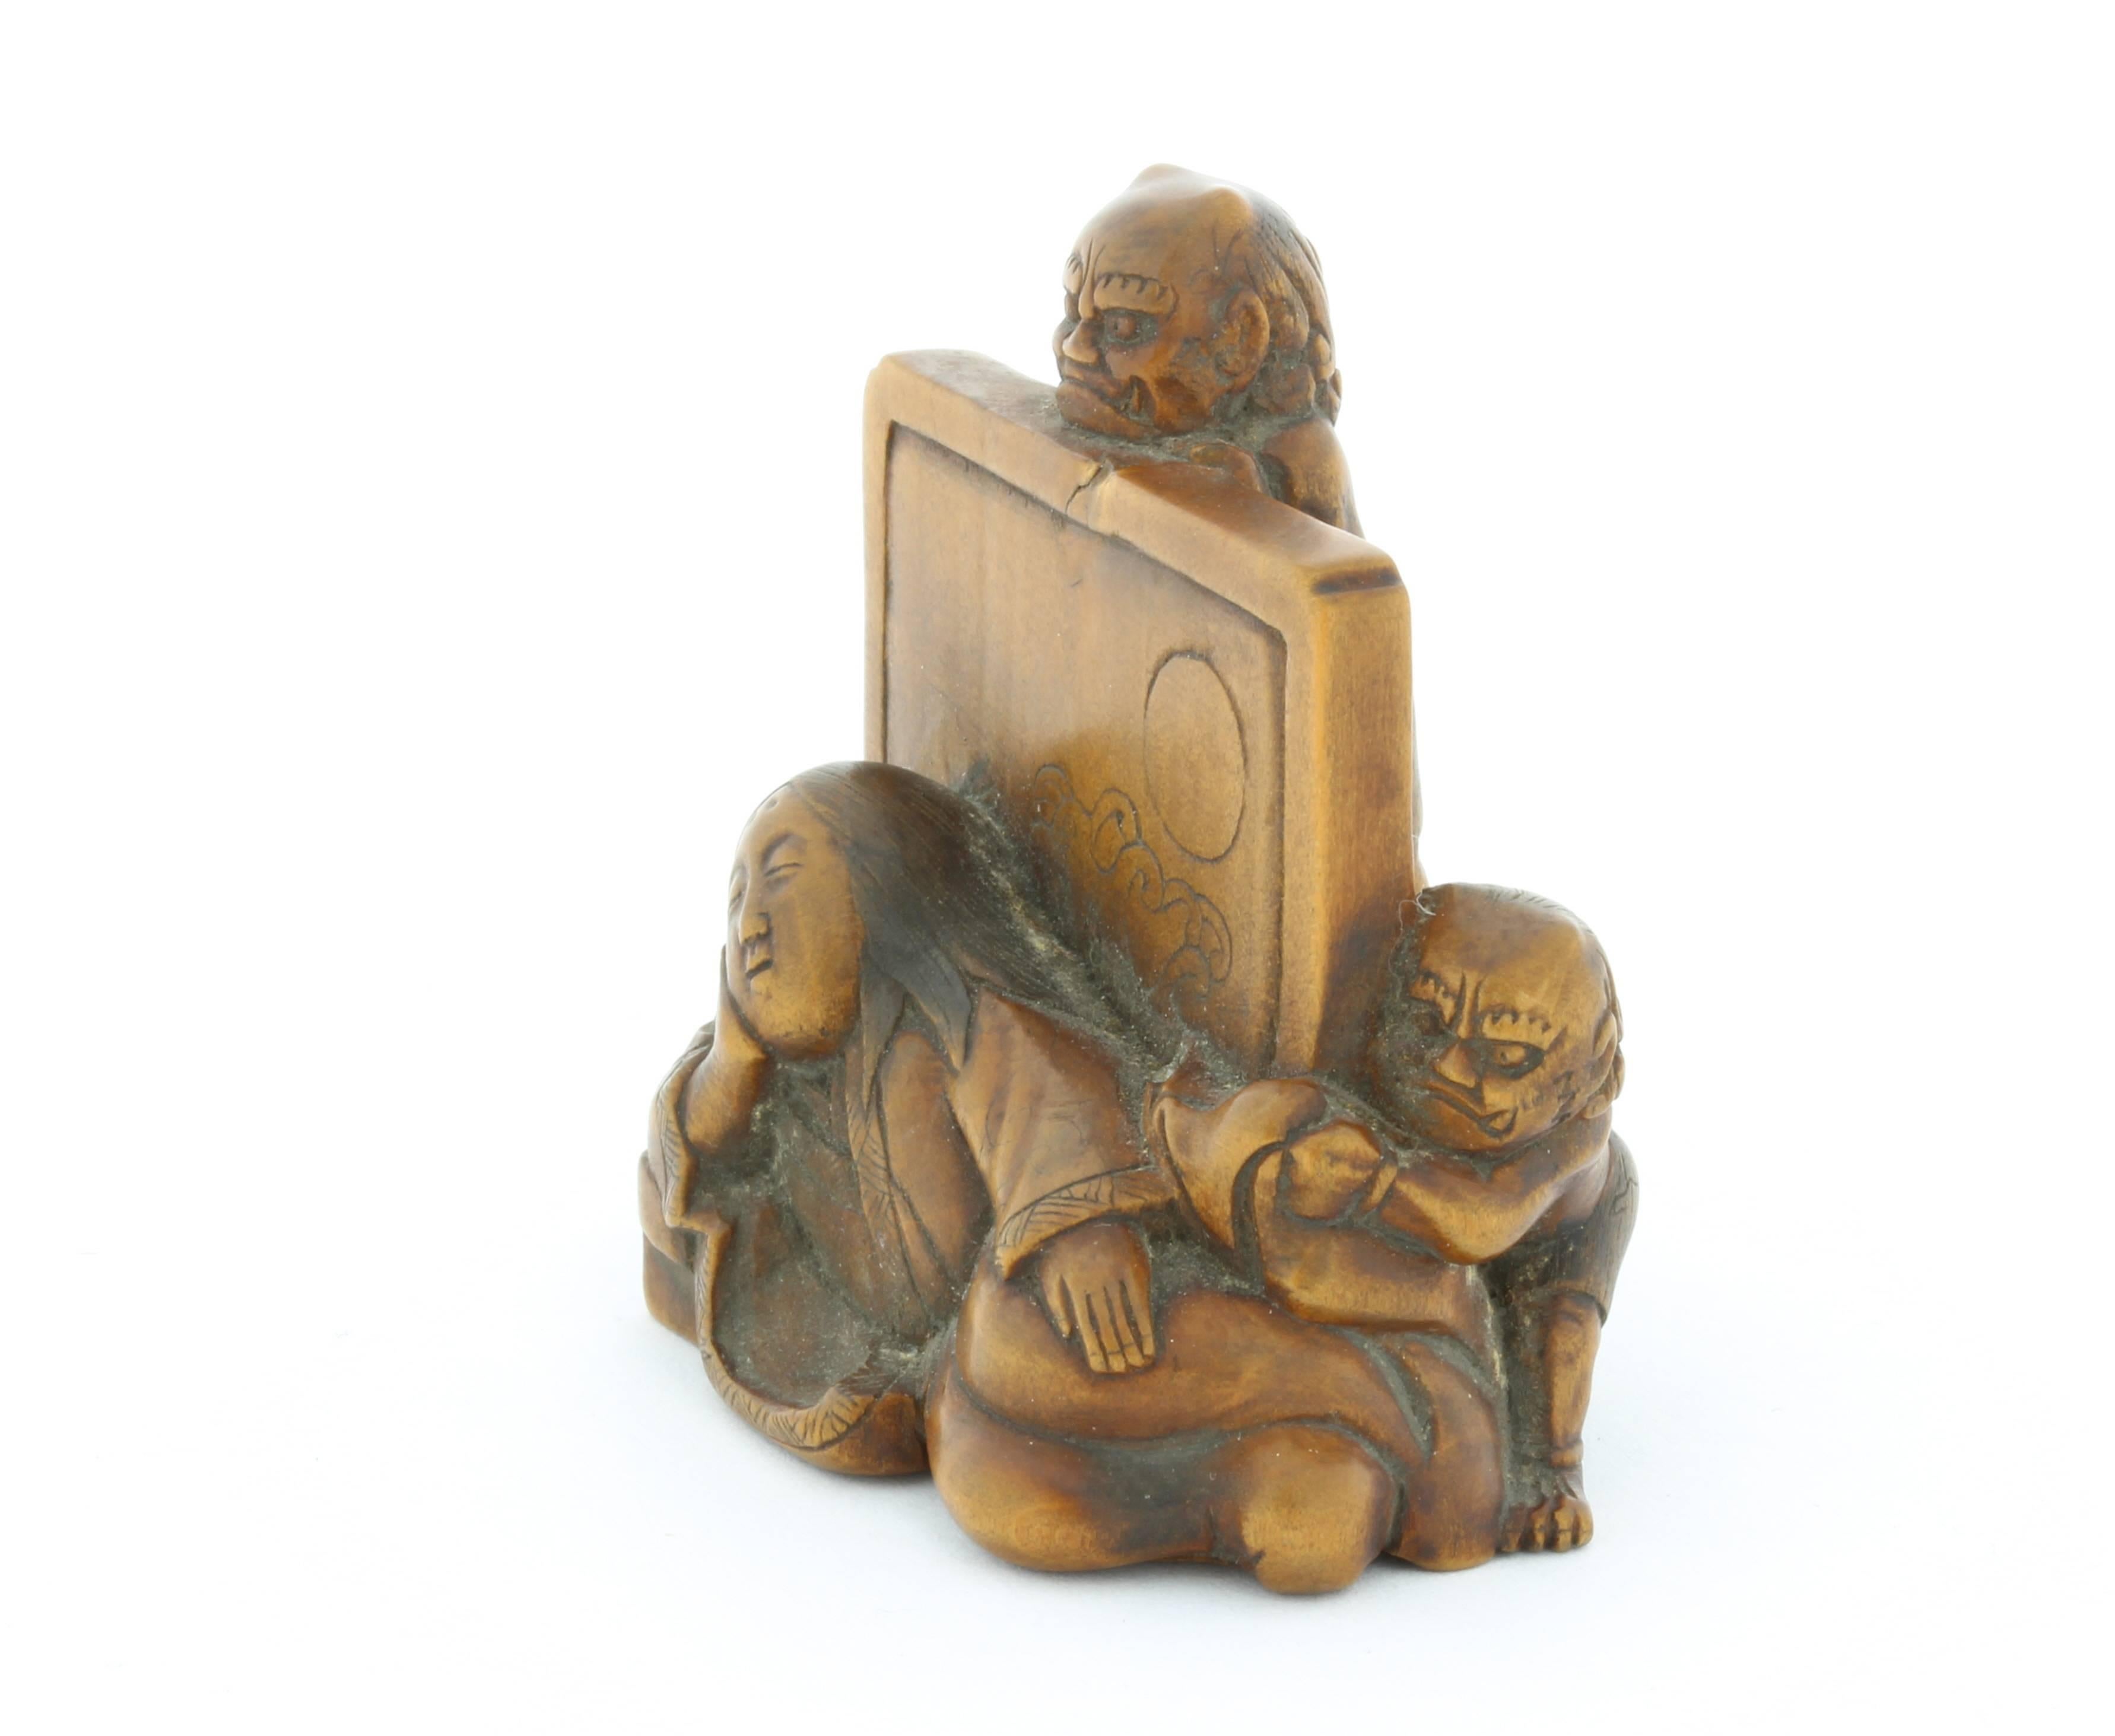 This netsuke is made entirely out of wood and depicts a sleeping lady being watched by two oni (demons). Her long hair is loose and her eyebrows are carved high above on her forehead, suggesting her noble background. The screen behind her shows a